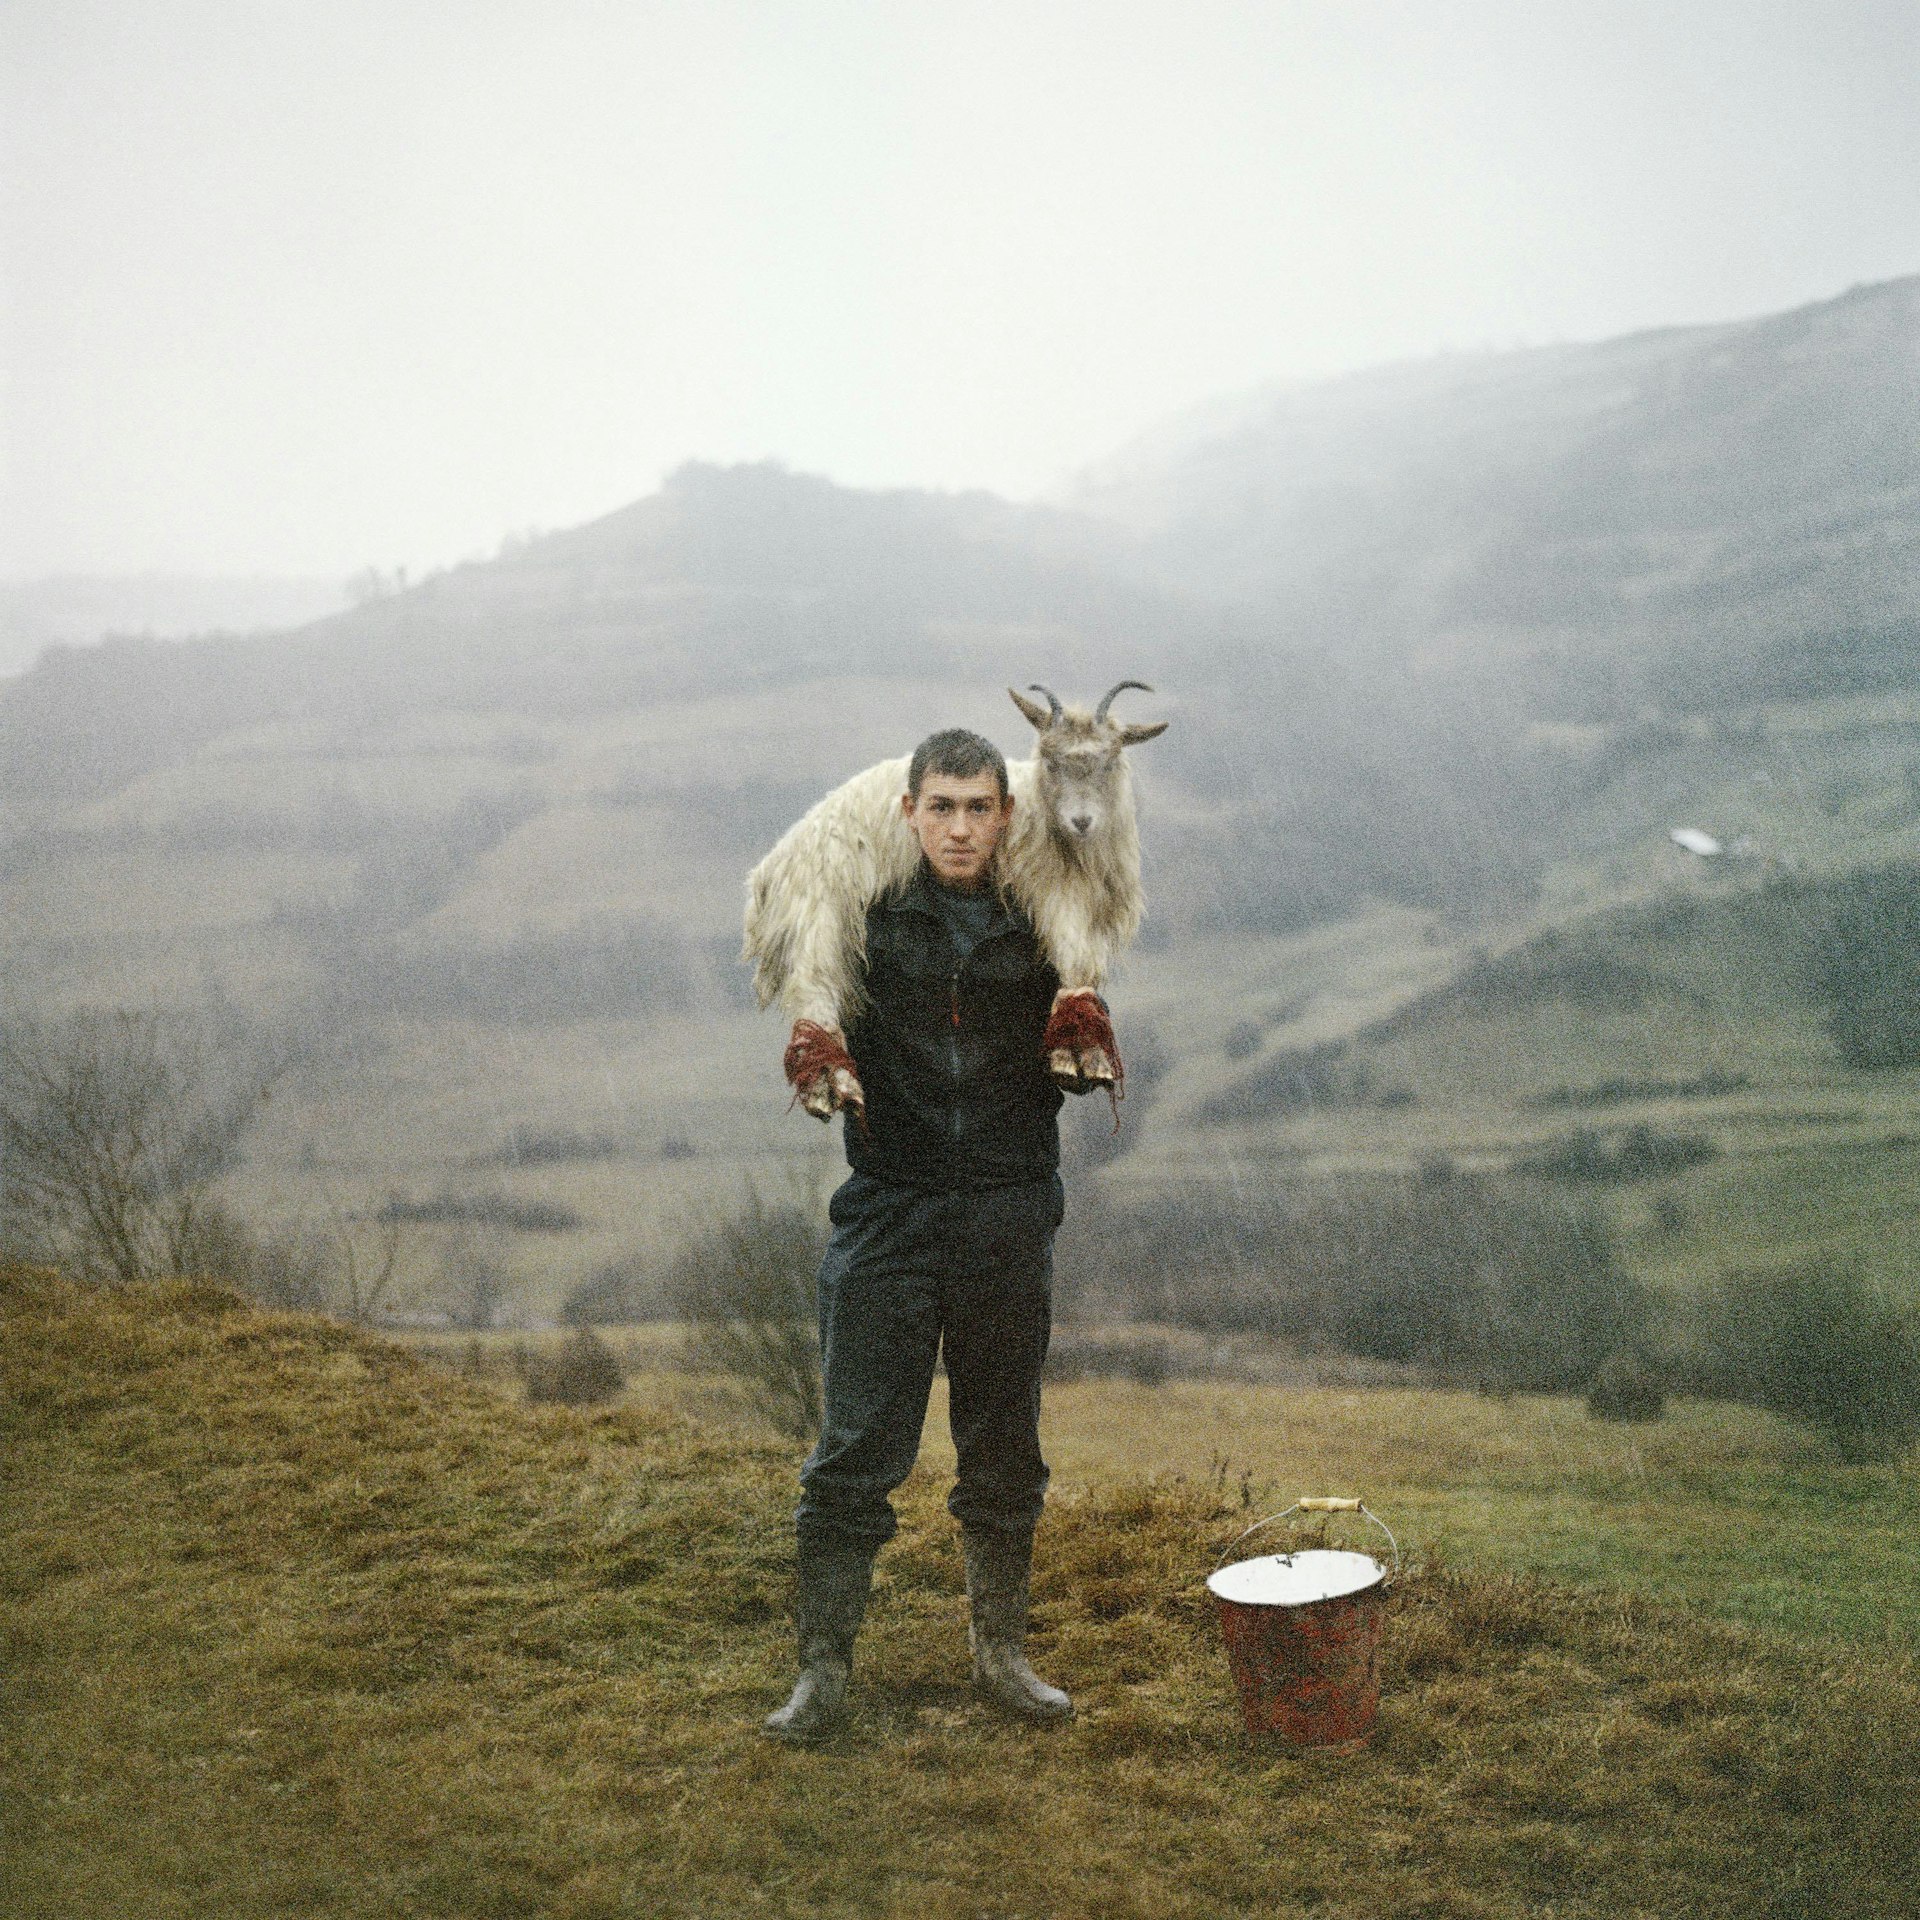 The cycle of life and death in the Romanian countryside